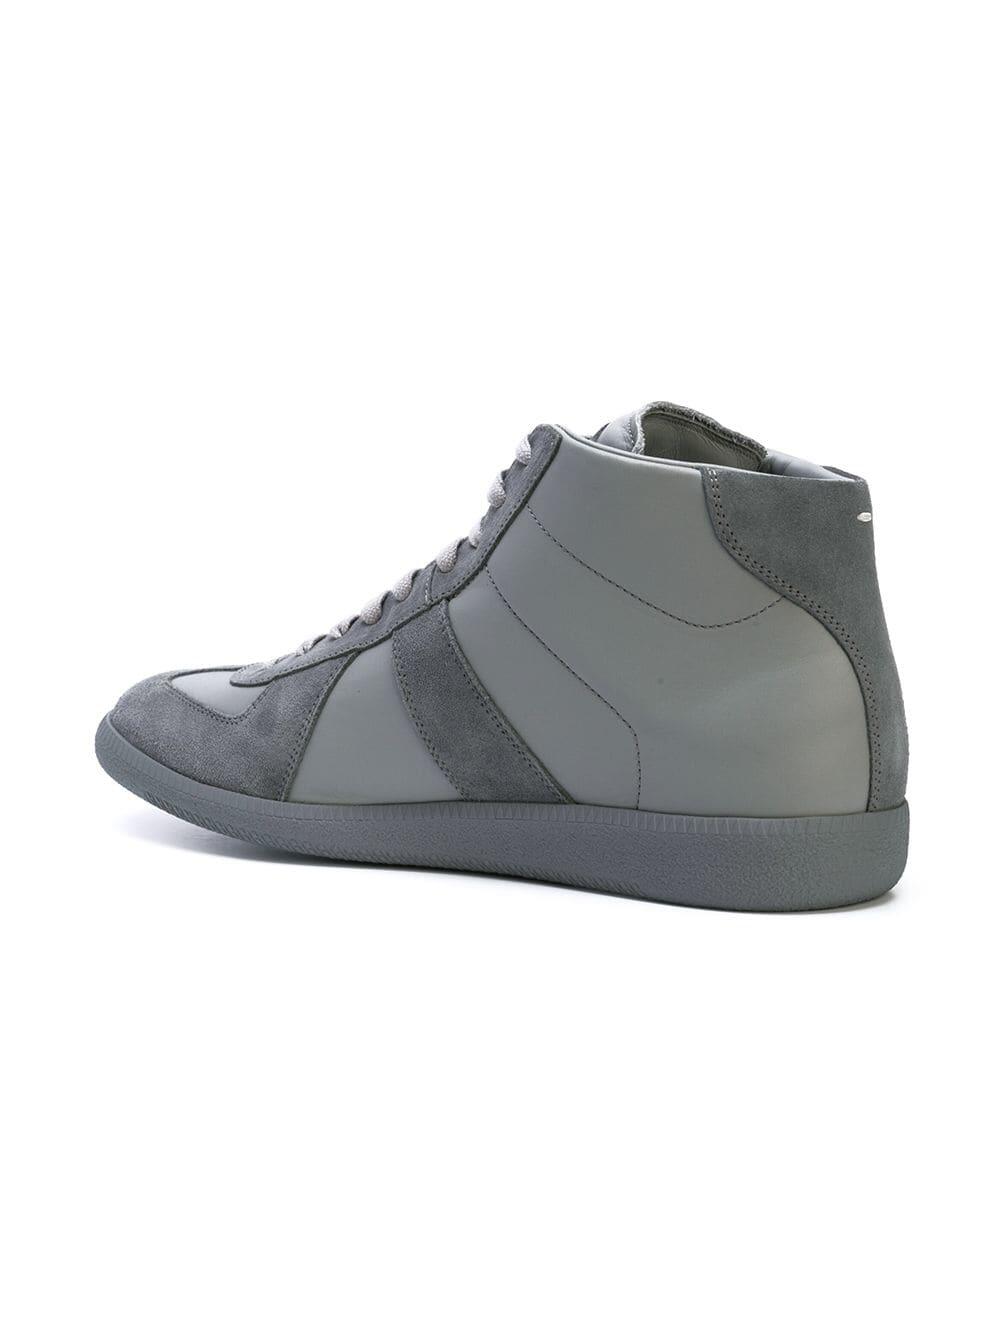 Maison Margiela - Replica Gray Leather & Suede High Top Sneaker